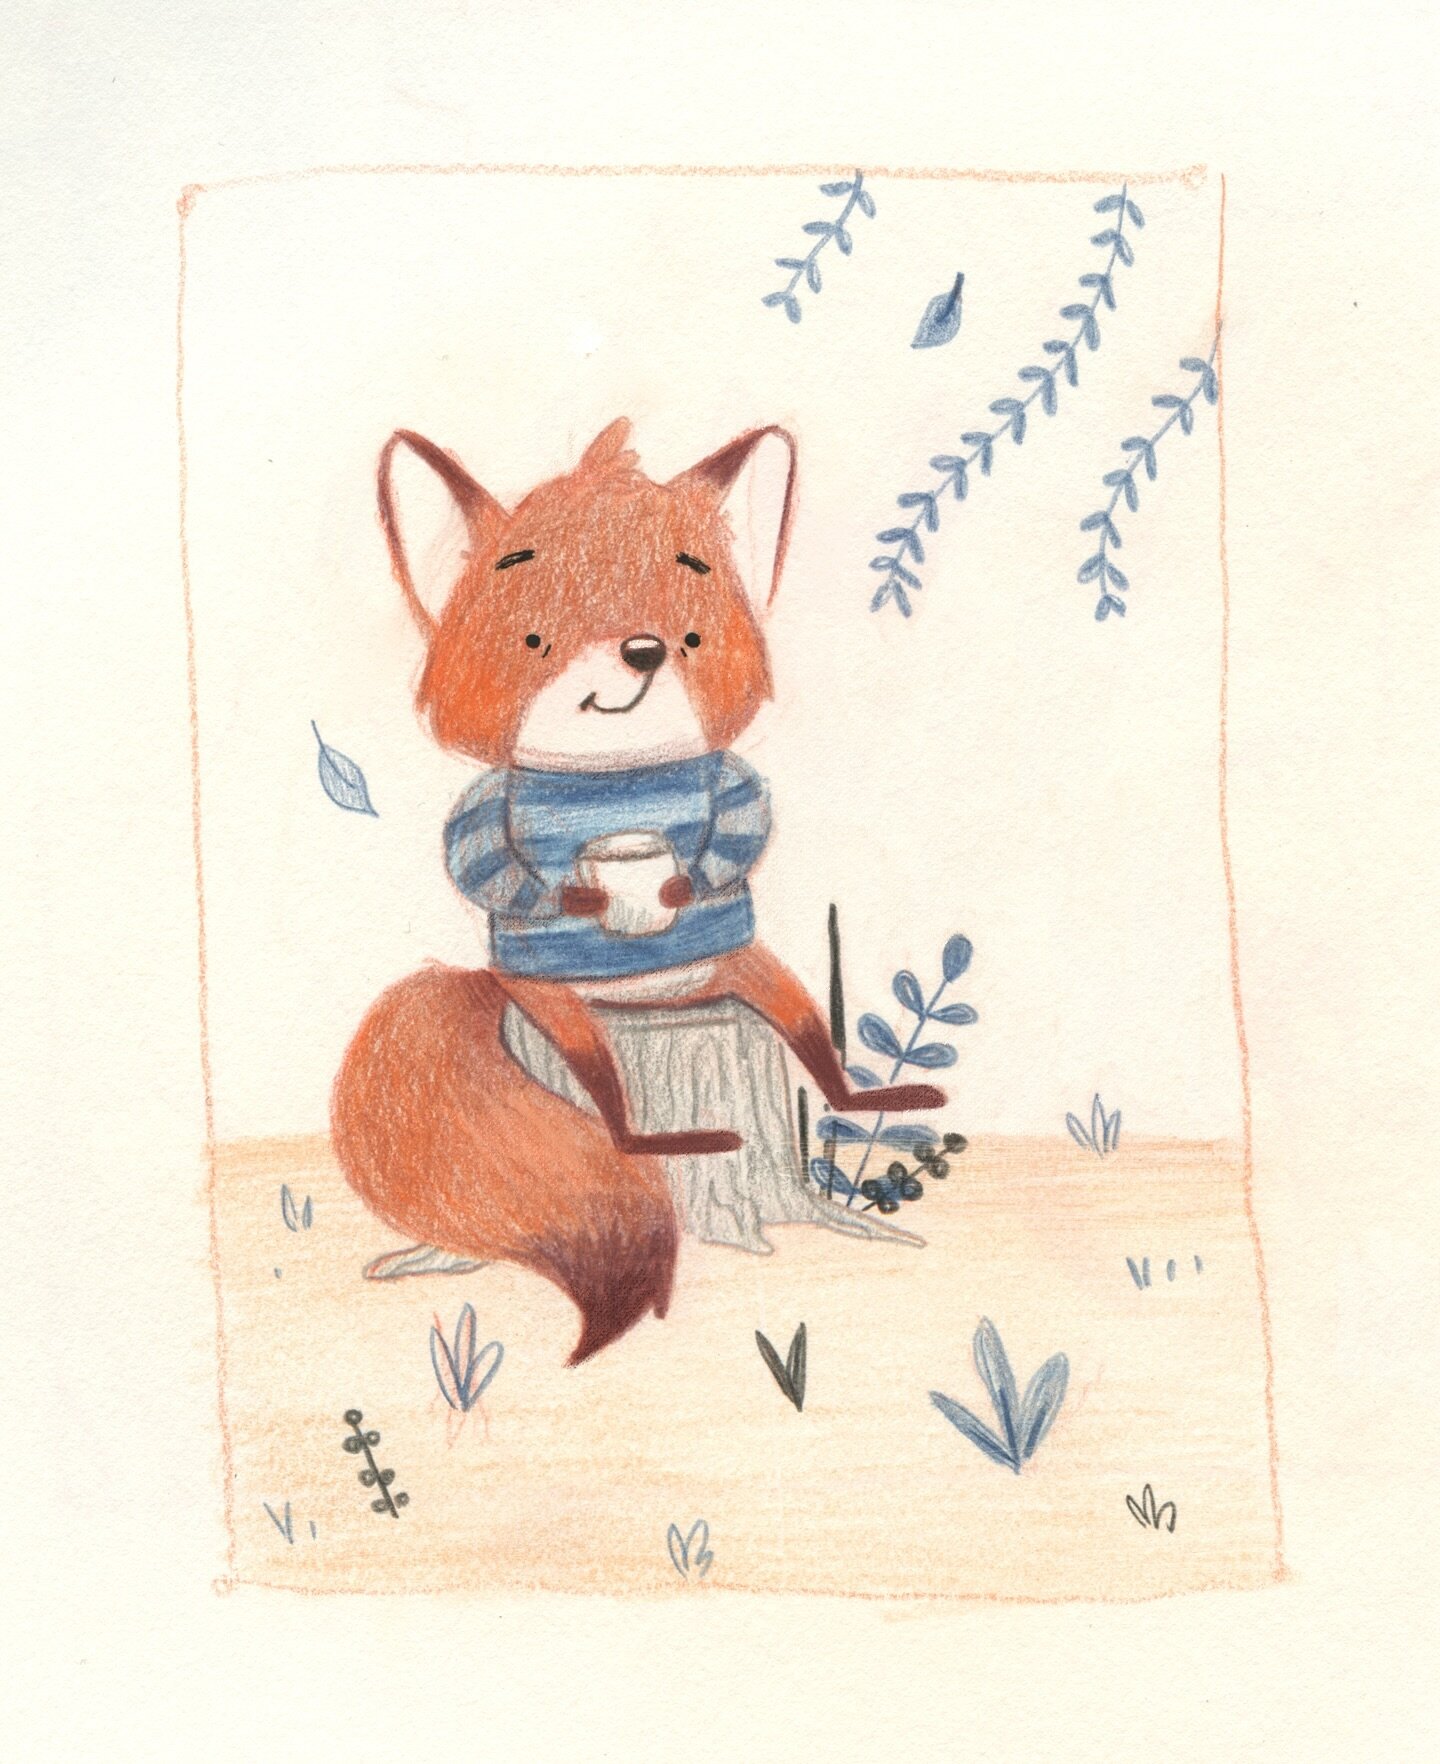 Here&rsquo;s Fox #58 for the #100daydrawing2023 challenge. I used @prismacolor col-erase pencils and scanned it in. Probably 95% of the time color and tone are totally off when scanning and I do a lot of adjusting in @photoshop to get them correct or